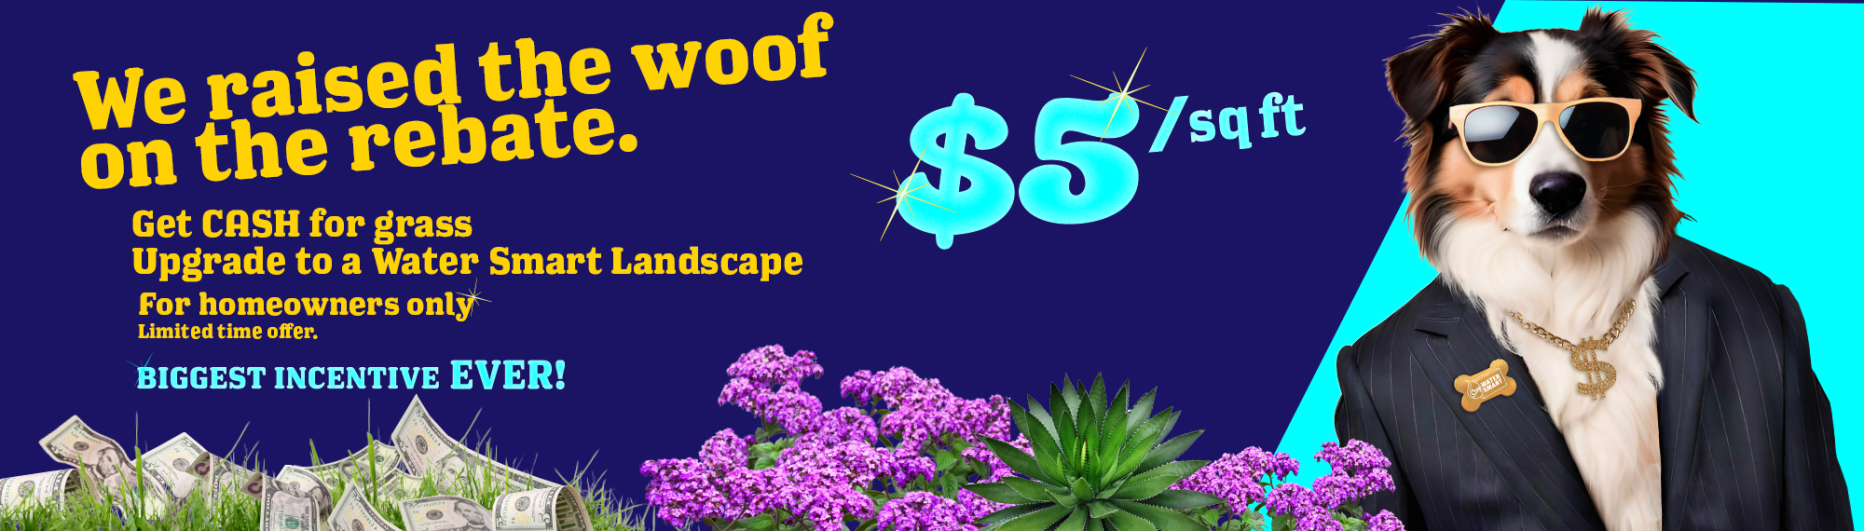 Dog with sunglasses, text says "$5 per square foot. We raised the woof on the rebate. Get cash for grass. Upgrade to a water-smart landscape. for homeowners only. Limited time offer. Biggest incentive ever. 